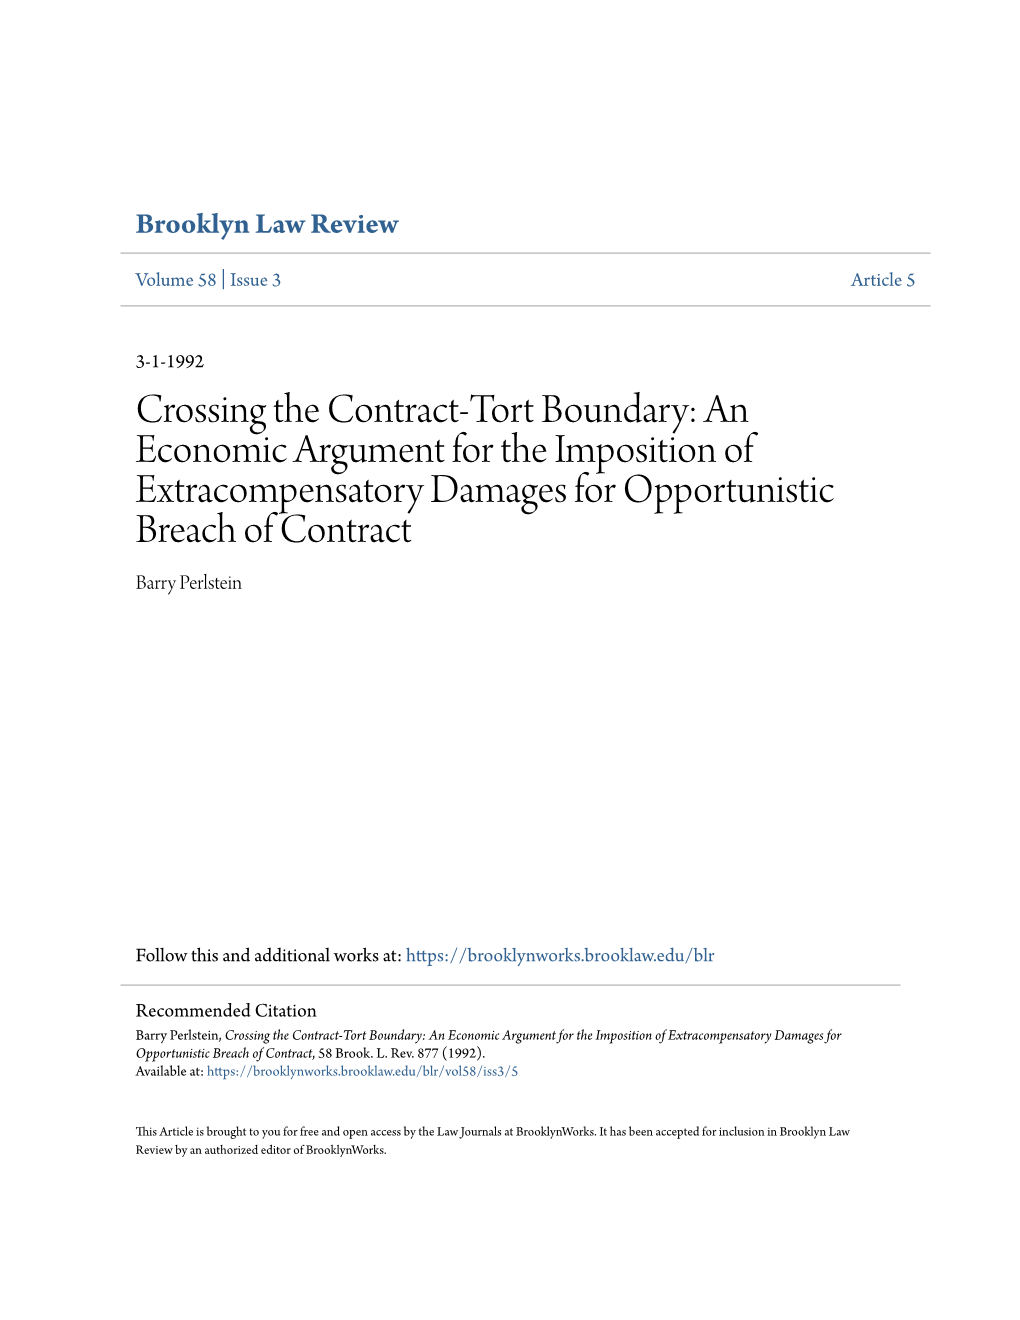 Crossing the Contract-Tort Boundary: an Economic Argument for the Imposition of Extracompensatory Damages for Opportunistic Breach of Contract Barry Perlstein